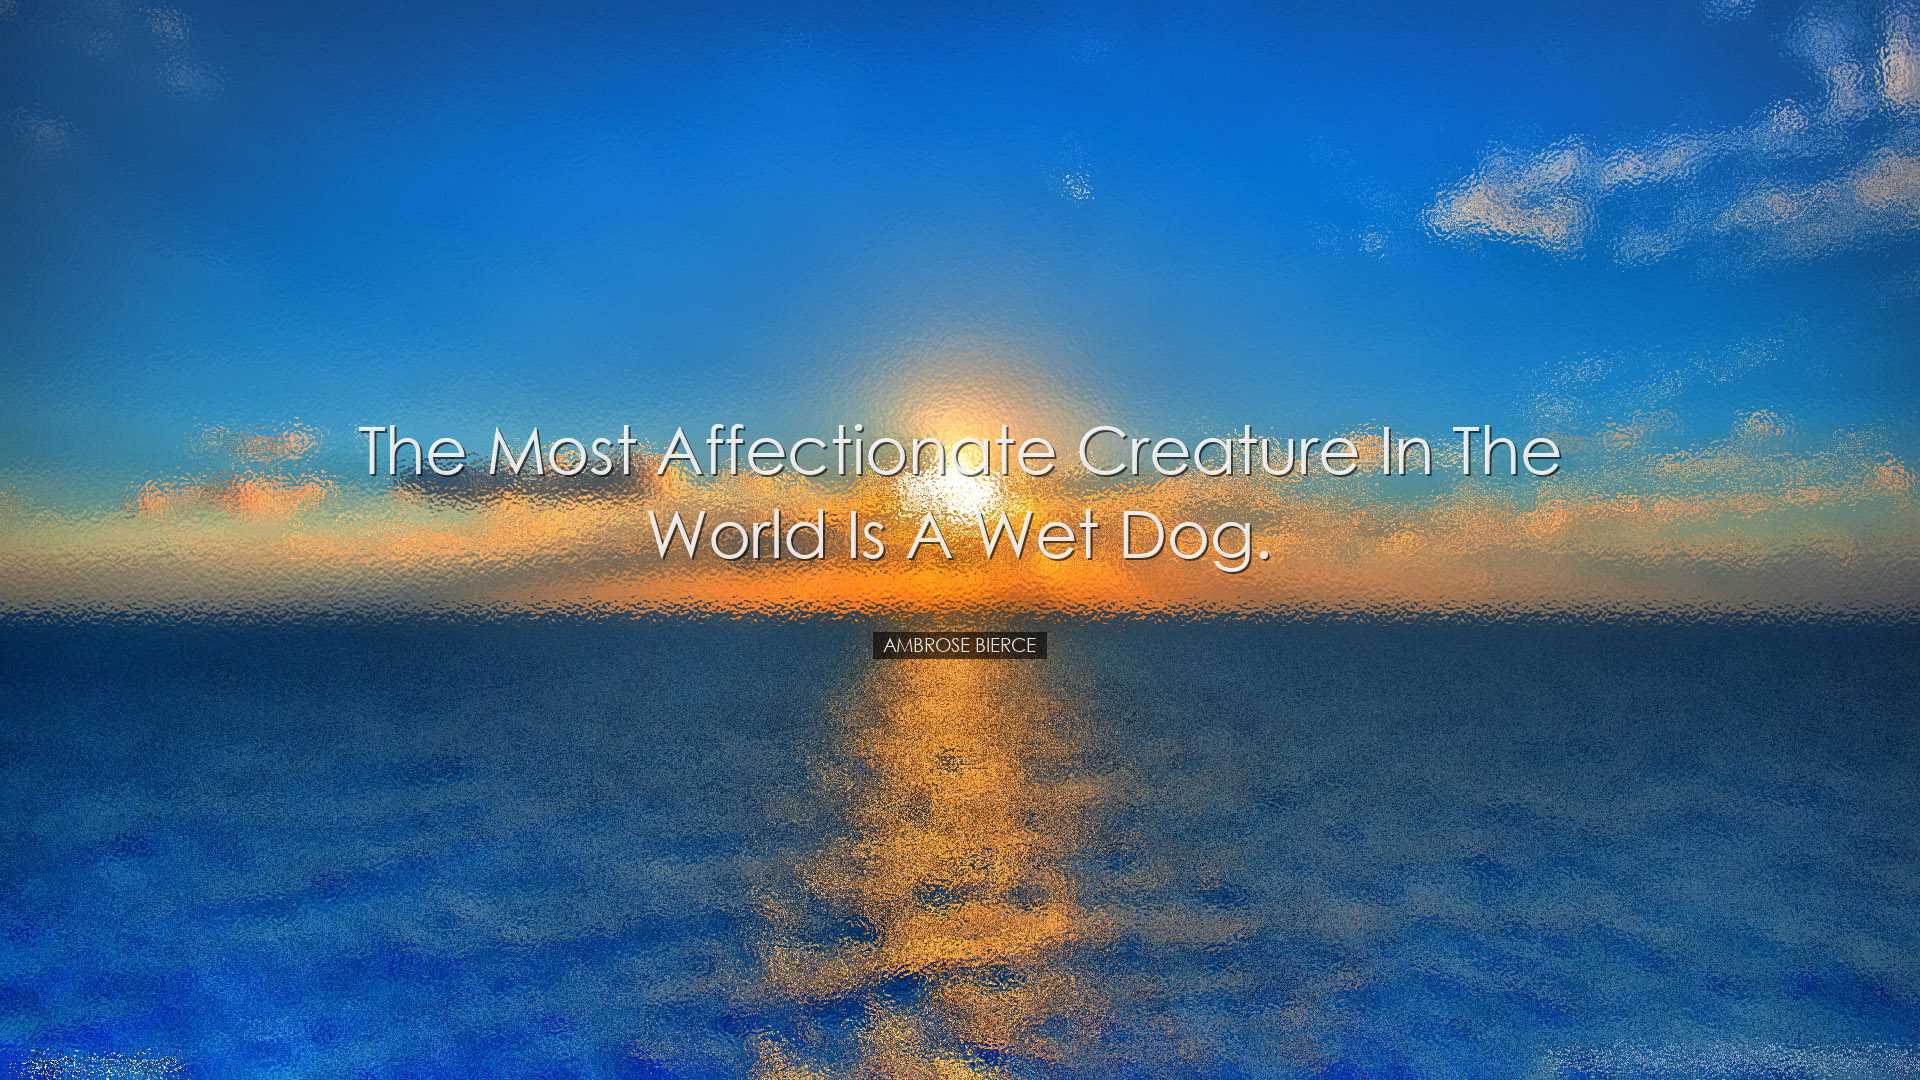 The most affectionate creature in the world is a wet dog. - Ambros